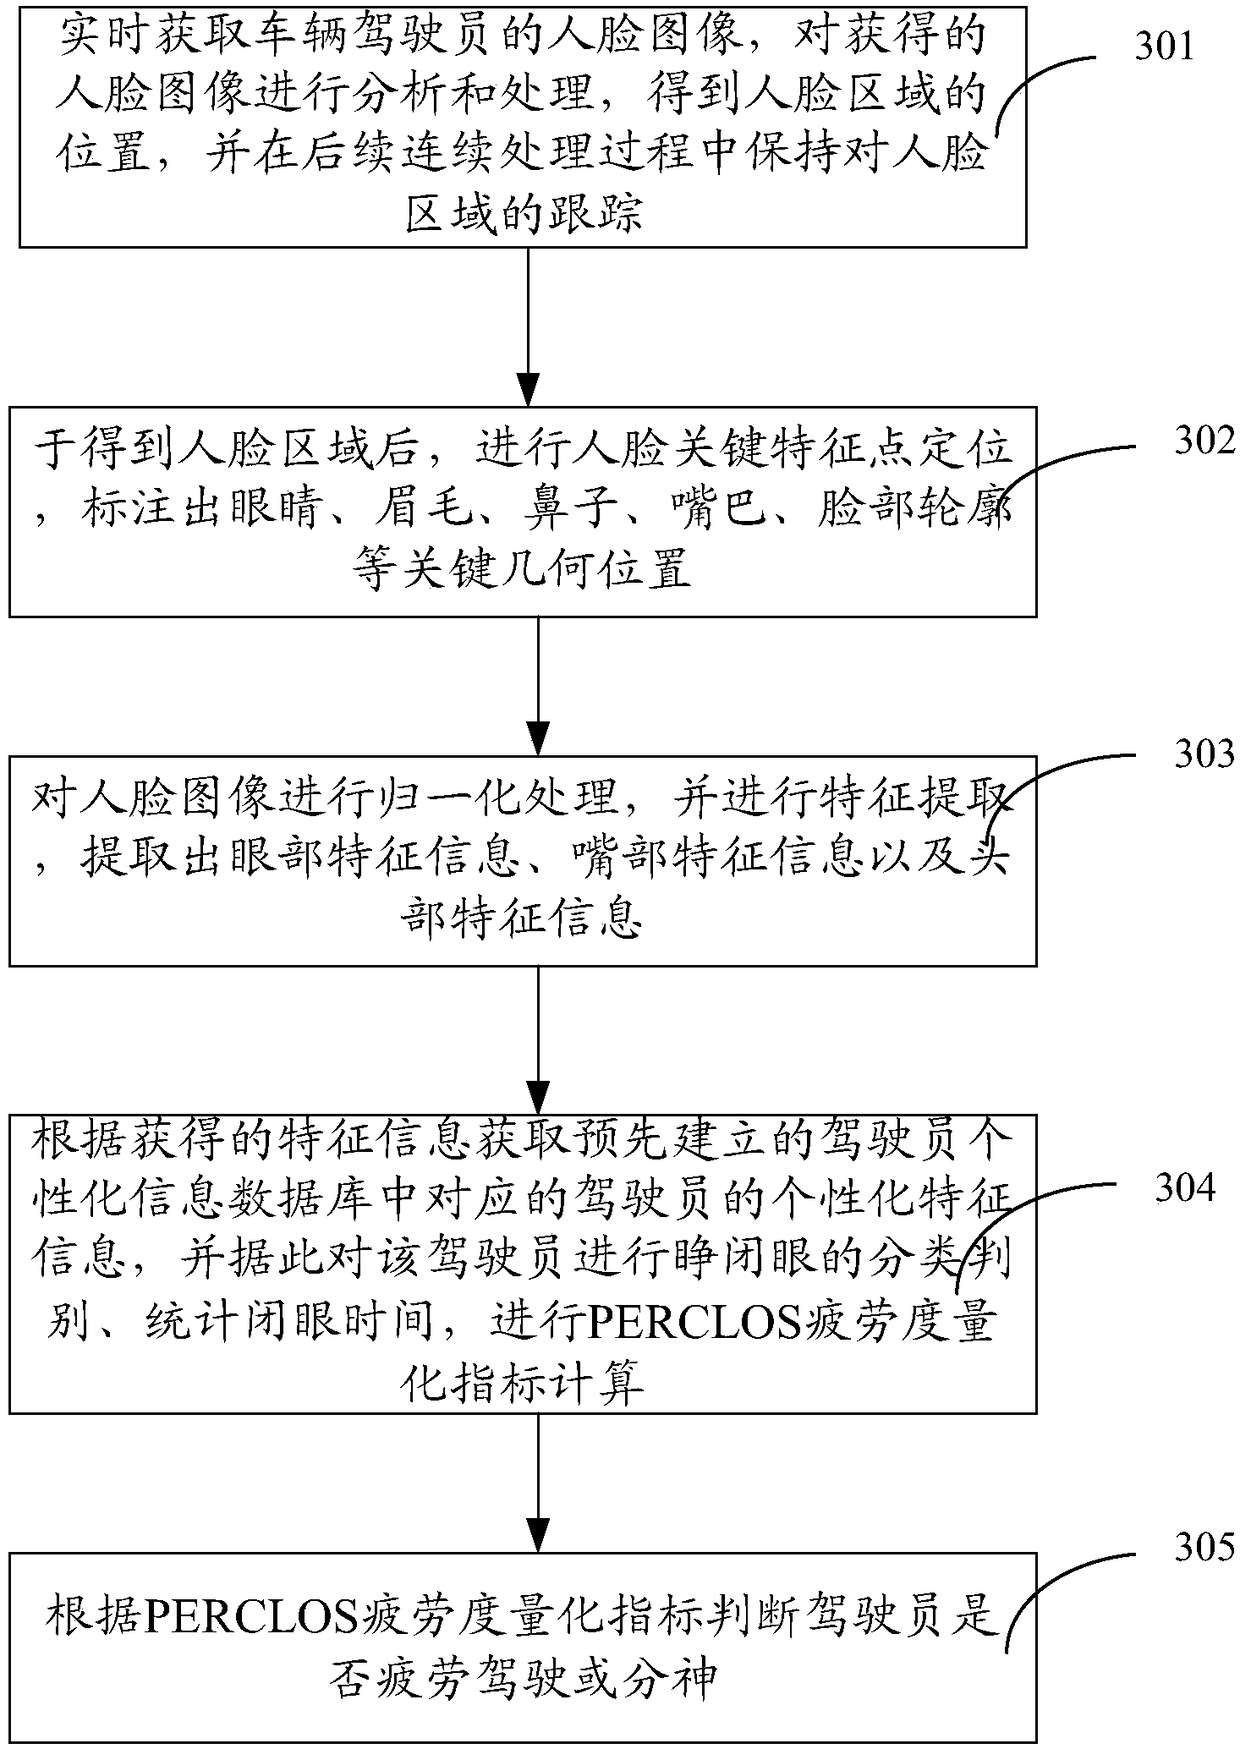 Vehicle driver fatigue monitoring and early warning system and method